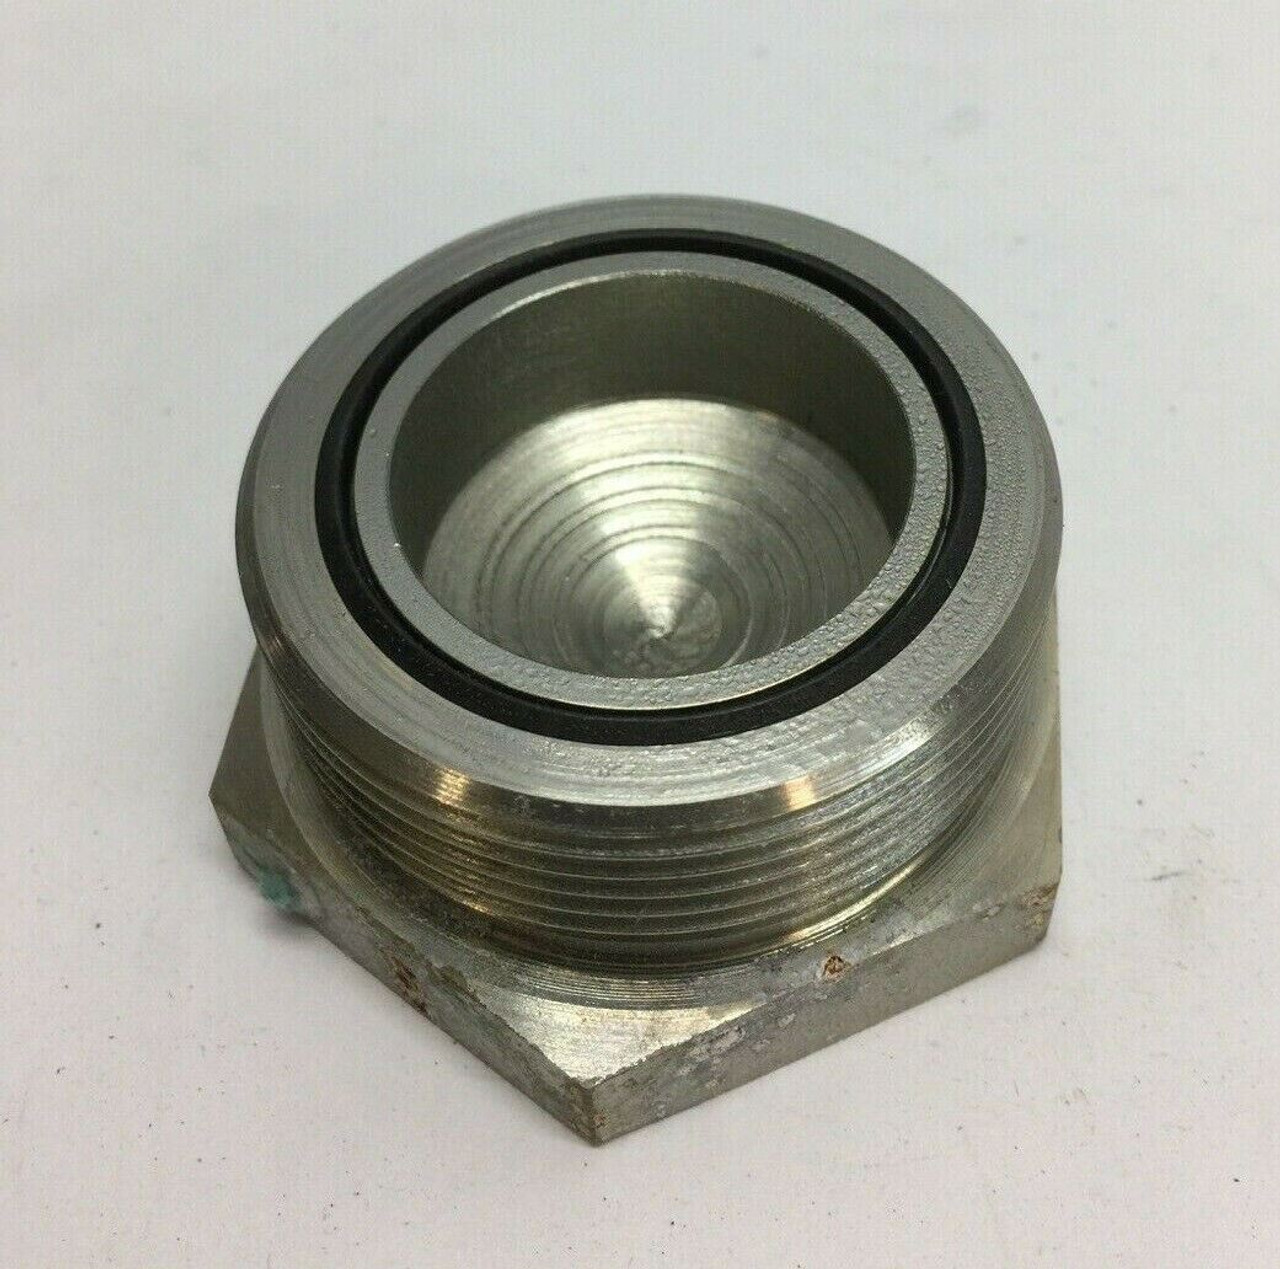 Seal-Lok O-Ring Face Seal Tube Fitting #24 PNLO-S Parker 1.25"